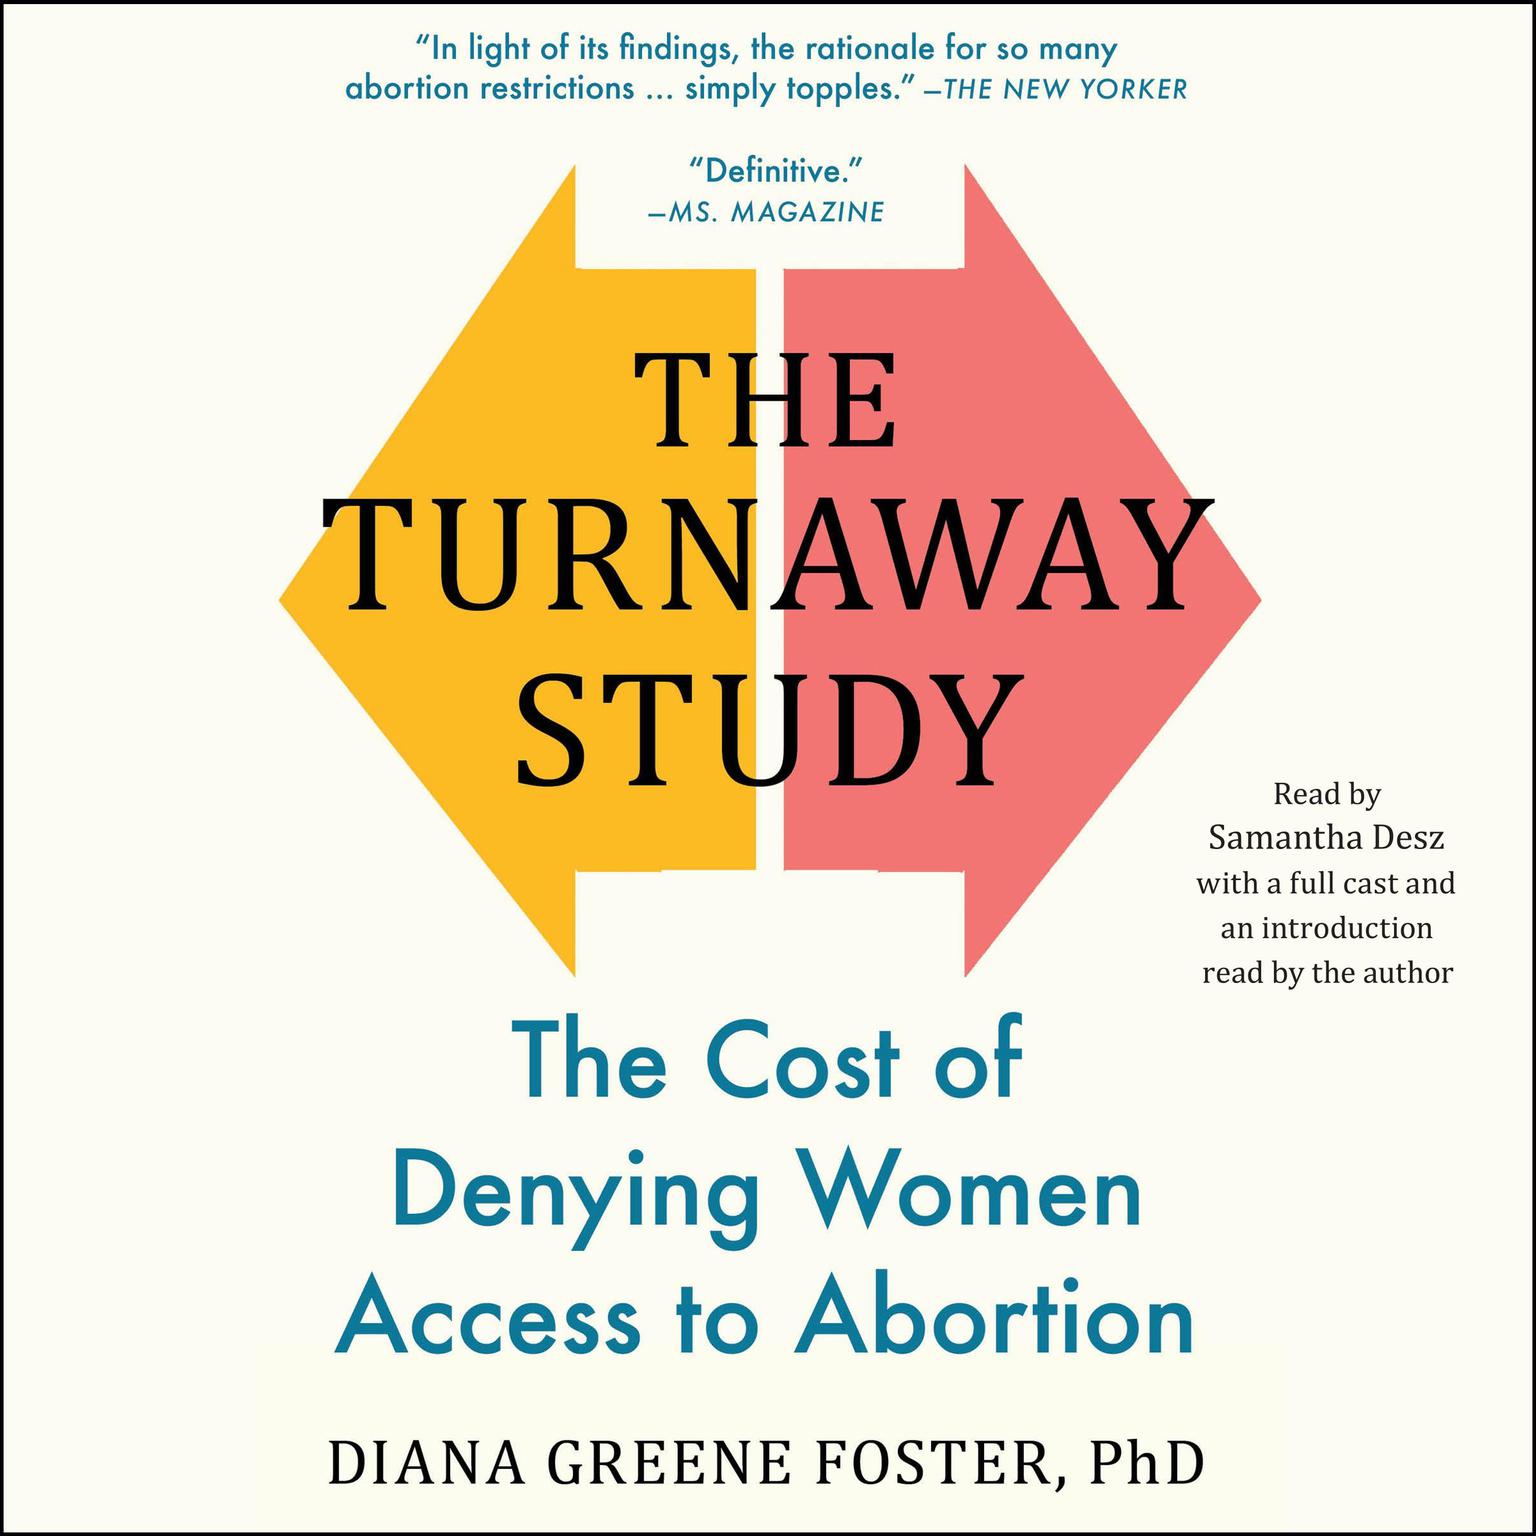 The Turnaway Study: The Cost of Denying Women Access to Abortion Audiobook, by Diana Greene Foster